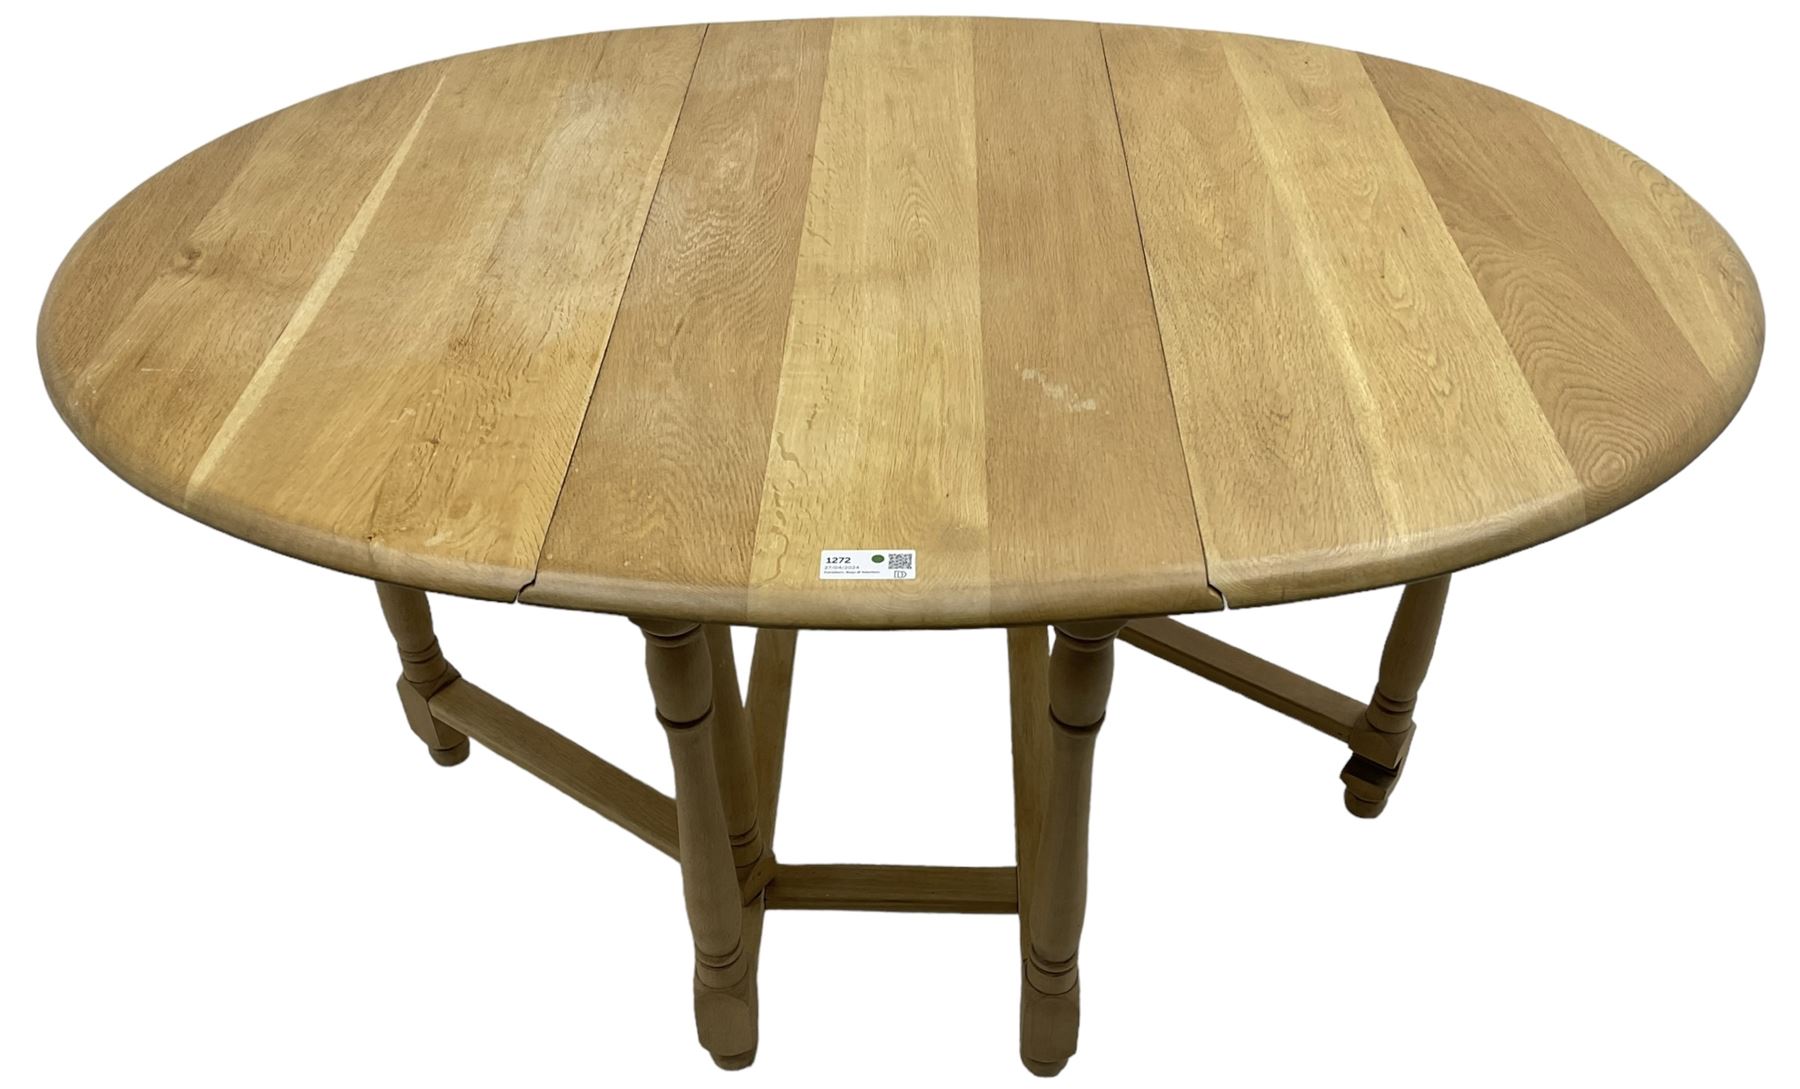 Contemporary oak and beech dining table - Image 6 of 6